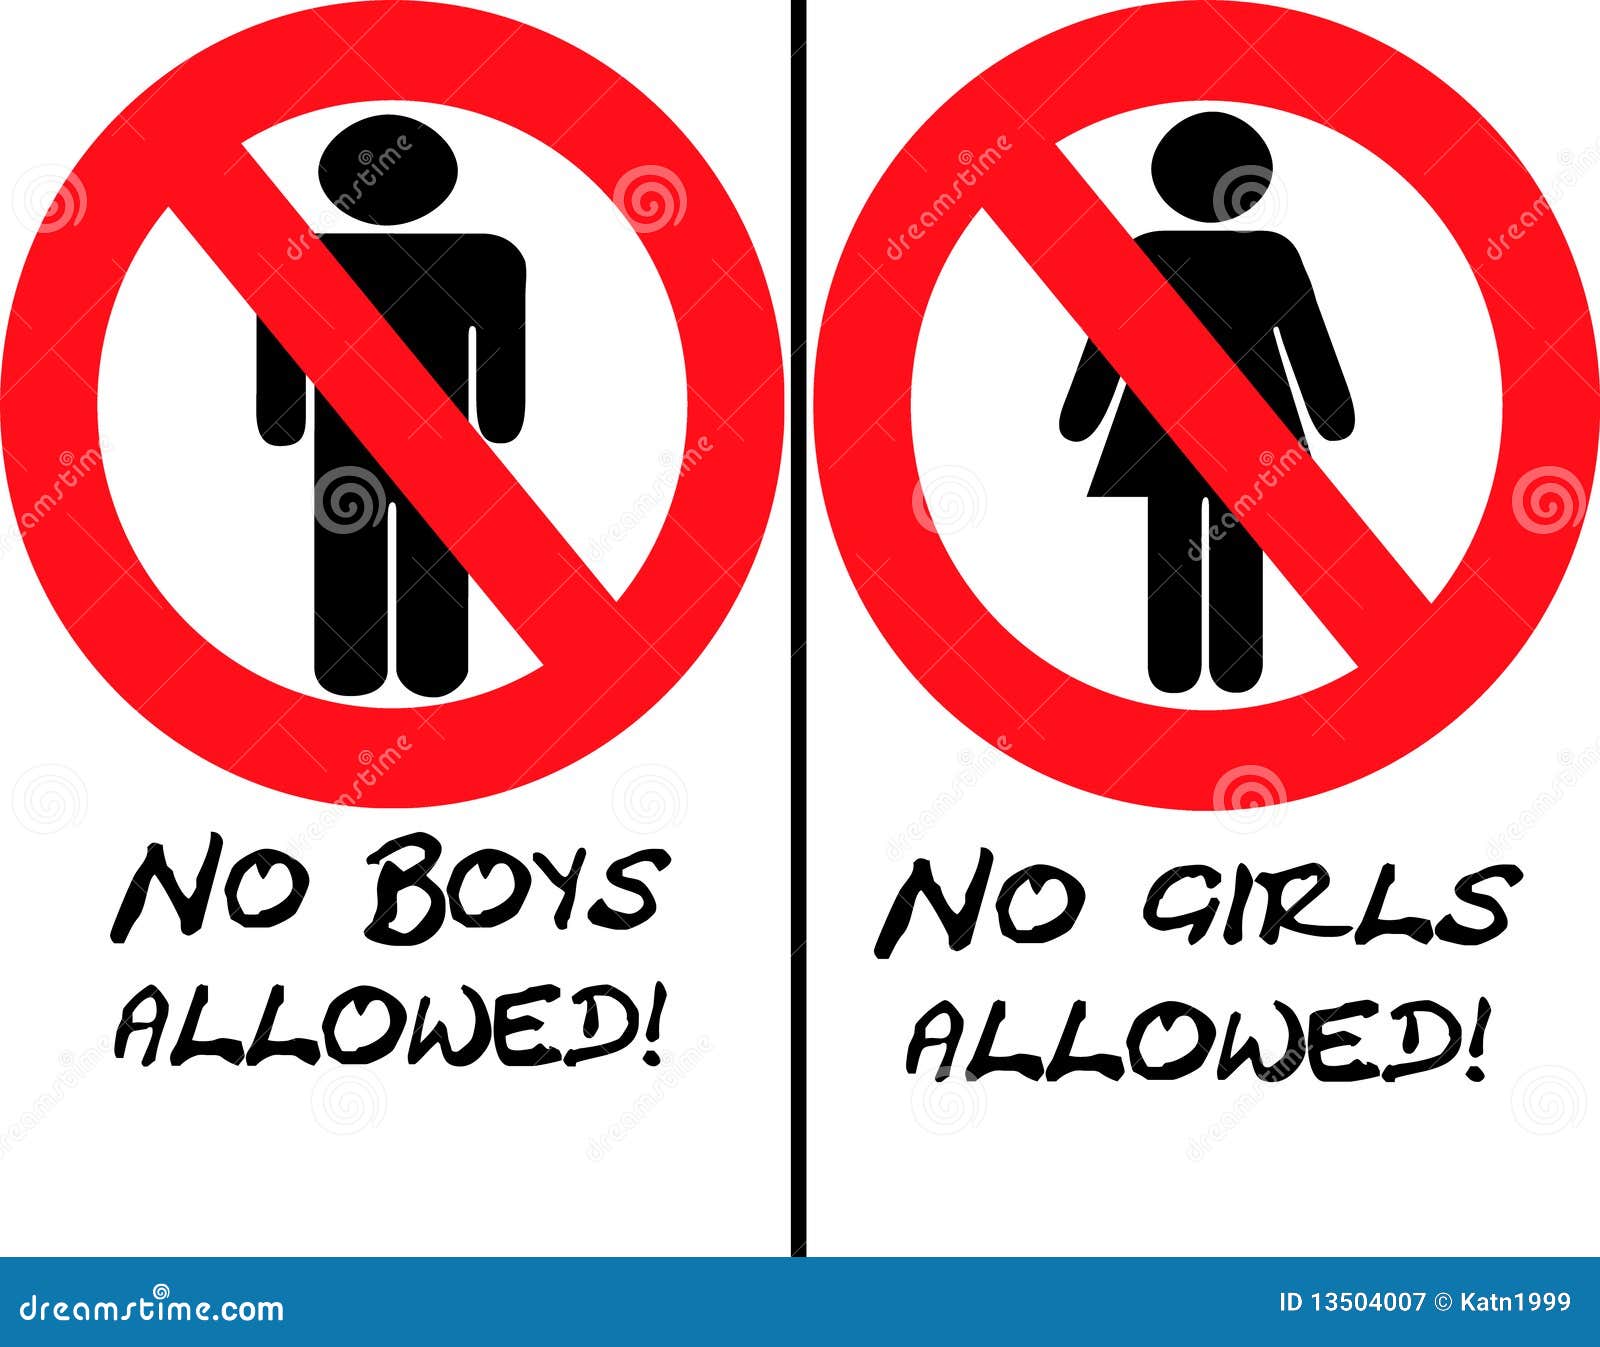 No Girls or Boys Allowed Signs.